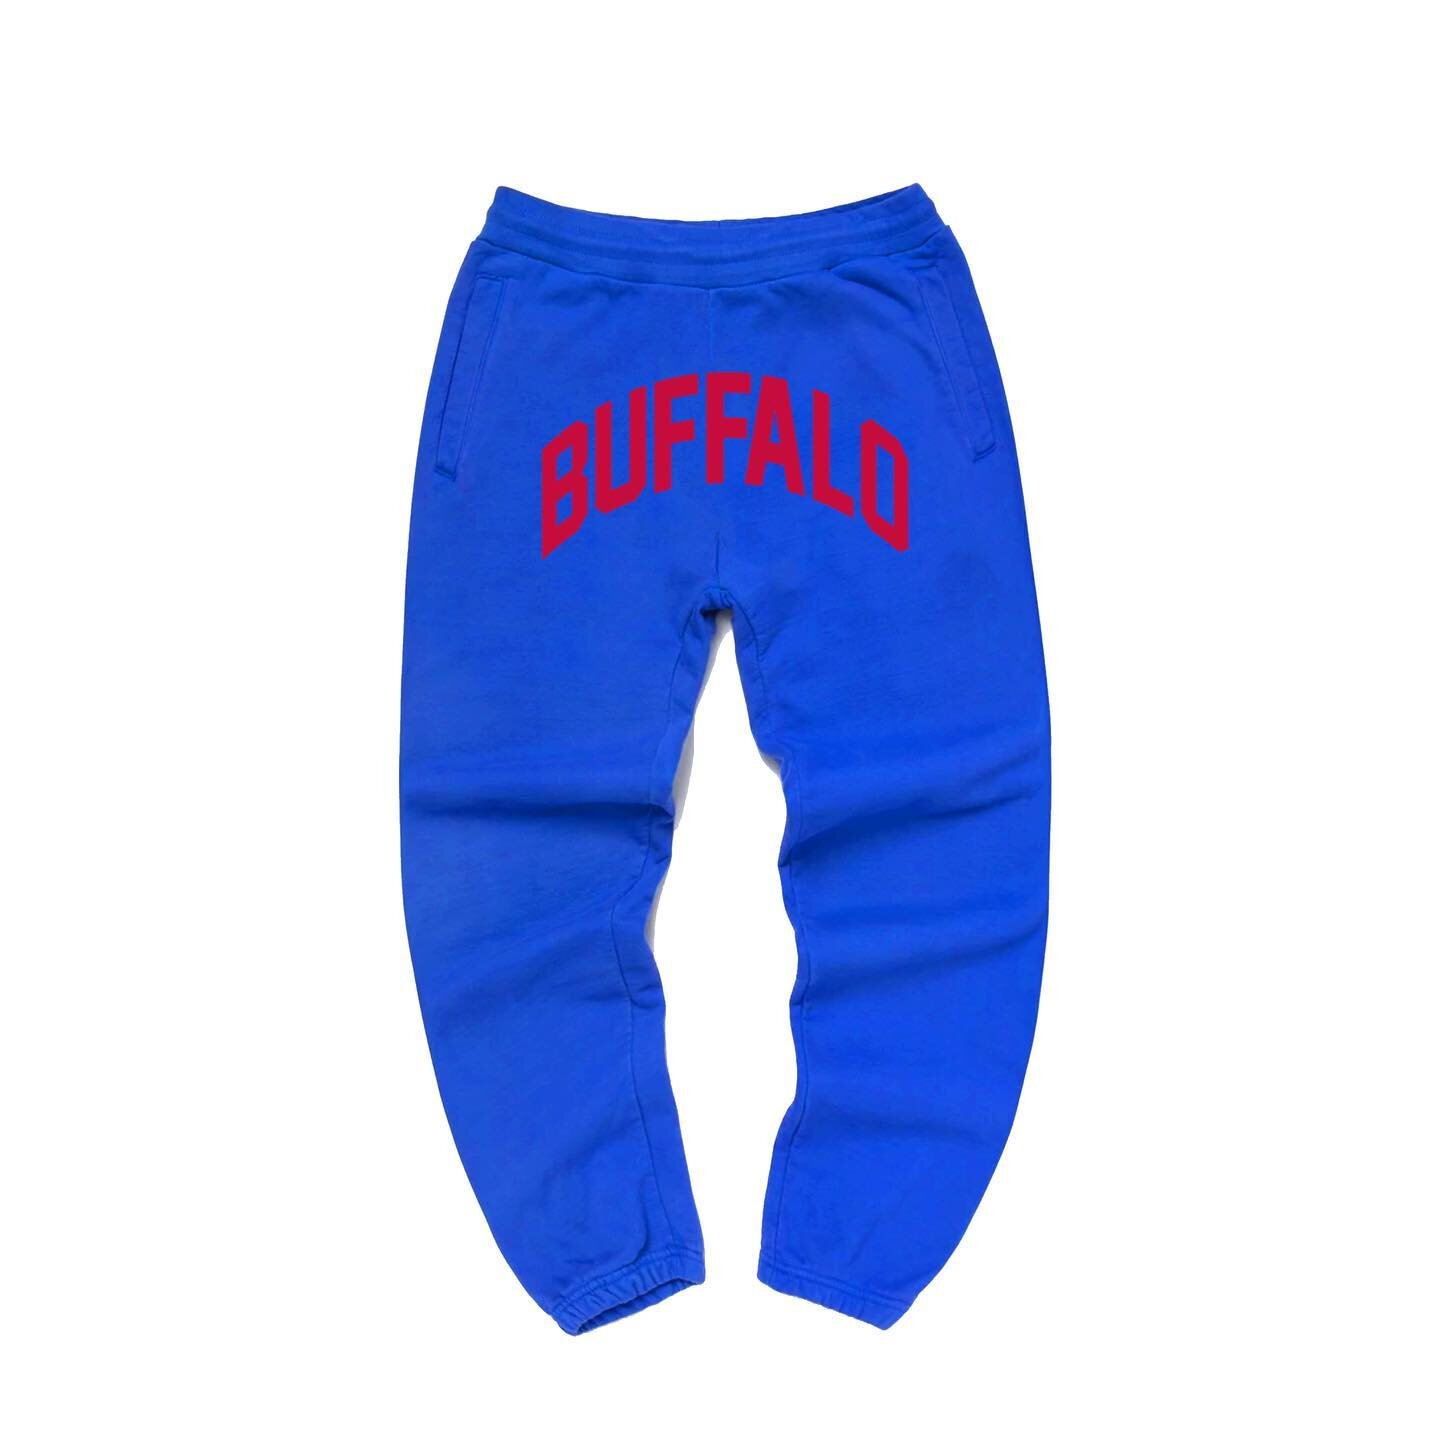 Go Bills 🔥 Limited edition Buffalo pants are available now!